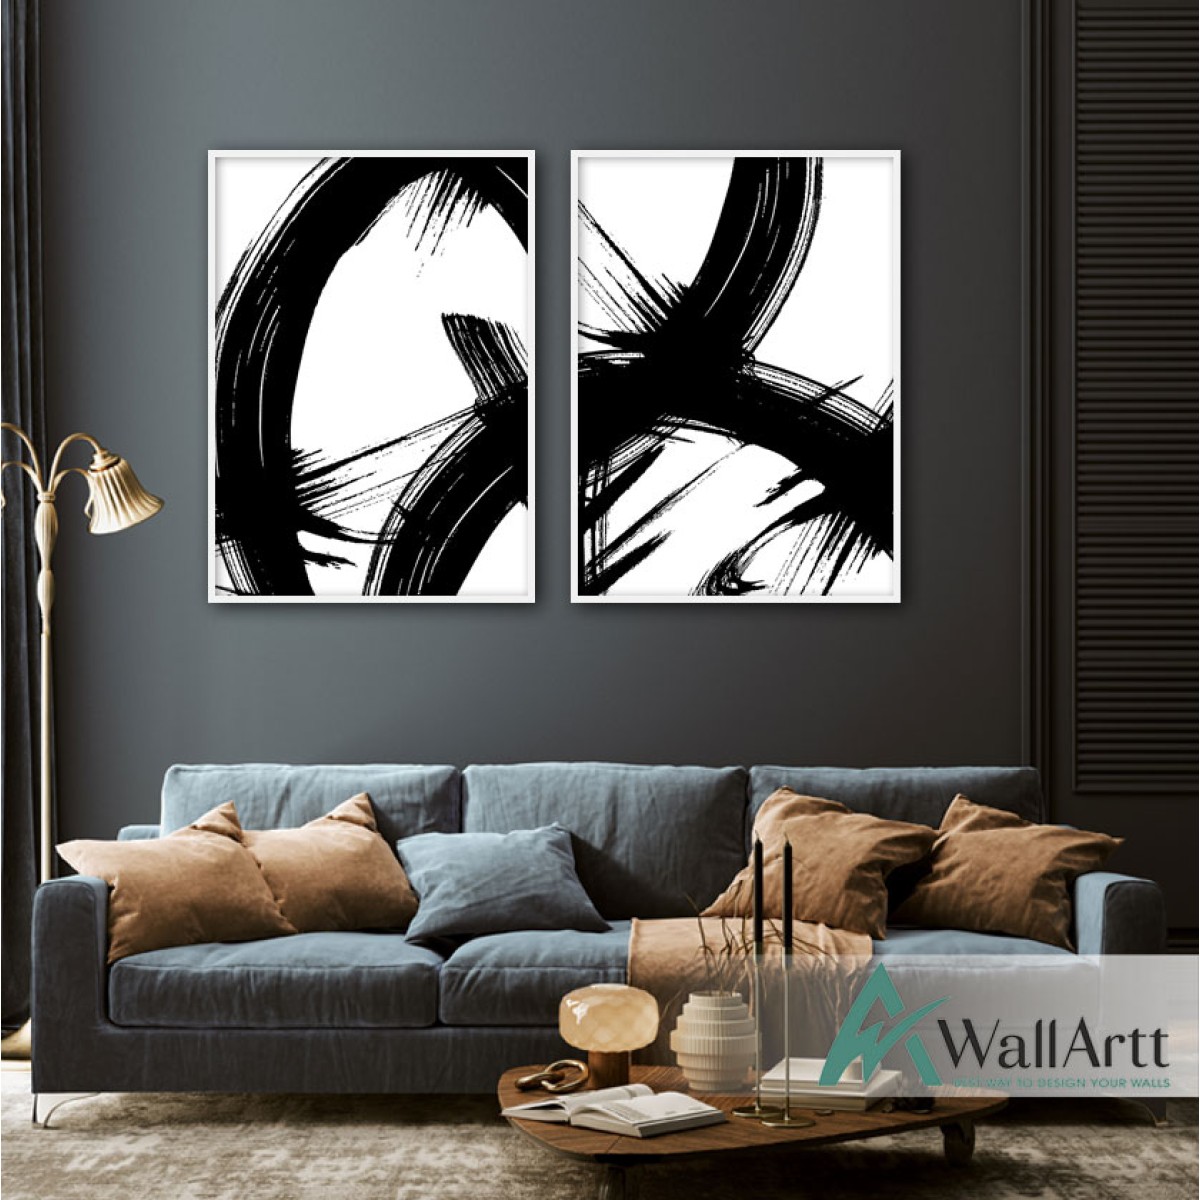 Black Abstract 2 Piece Textured Partial Oil Painting